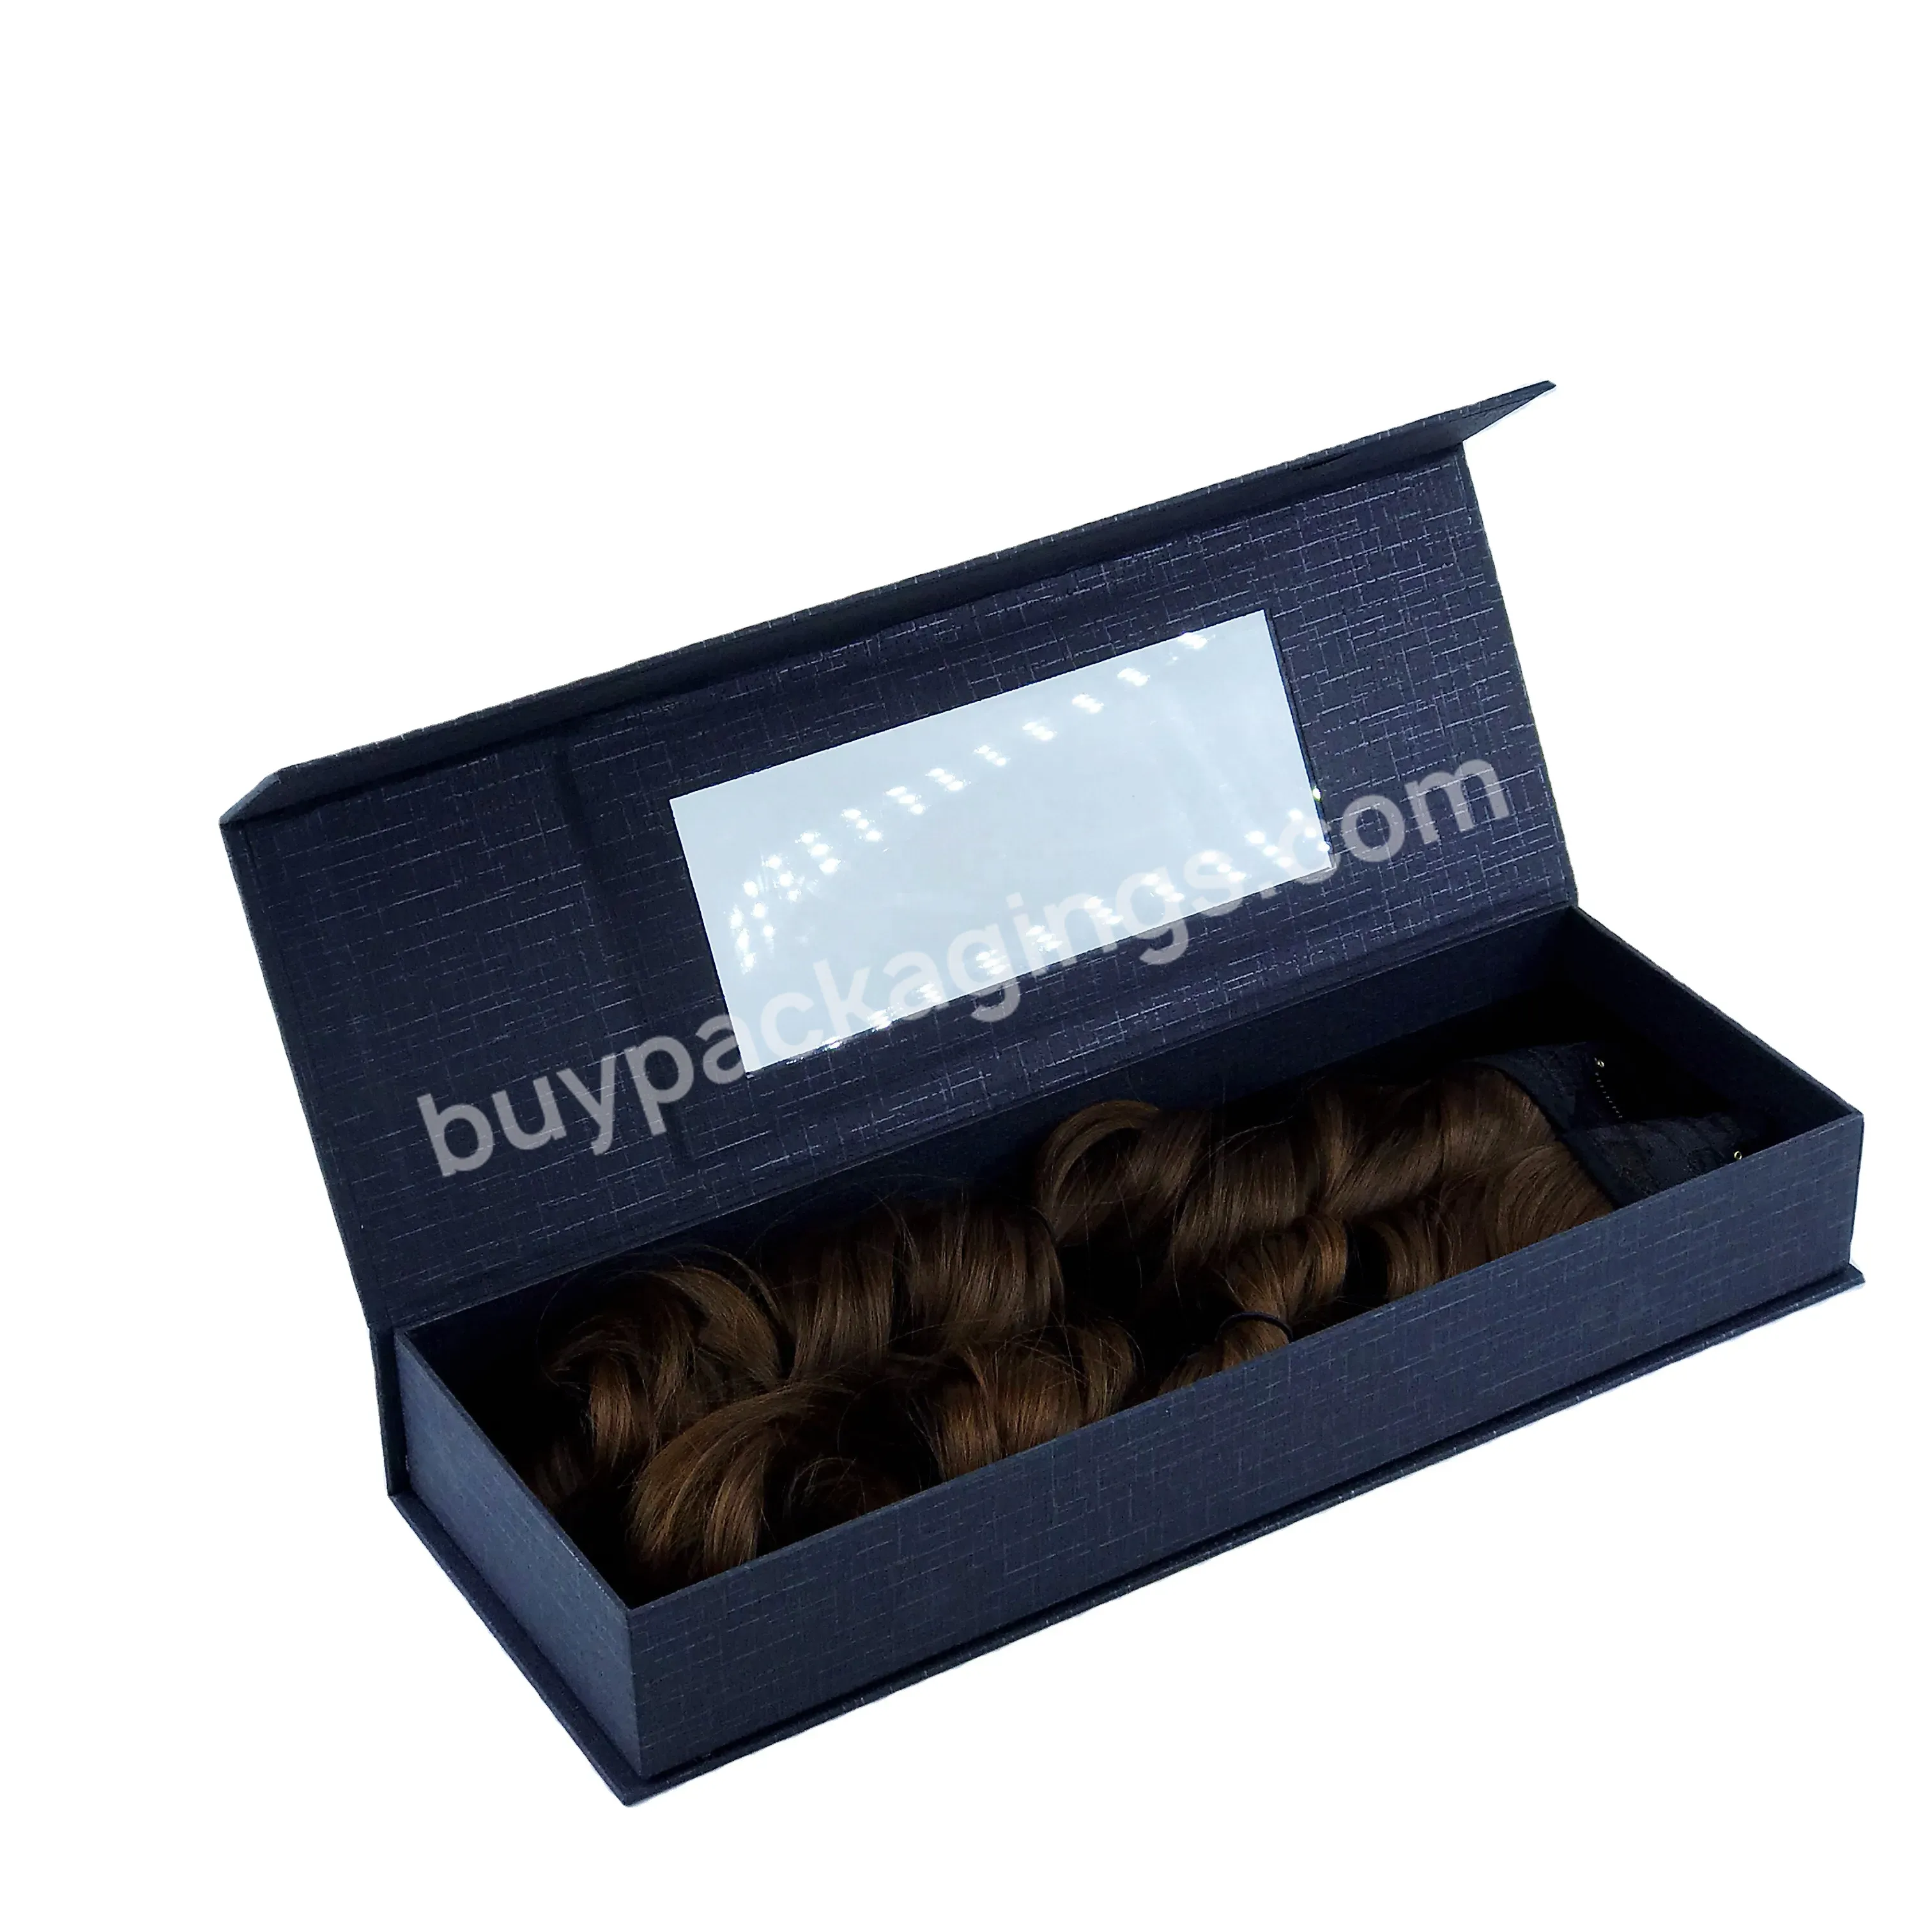 Custom China Luxury Matte Black Cardboard Boxes With Pvc Windows Magnet Box For Human Hair Wig Or Hair Extension Packaging - Buy China Luxury Matte Black Cardboard Boxes,Pvc Windows Magnet Box,Human Hair Wig Or Hair Extension Packaging.